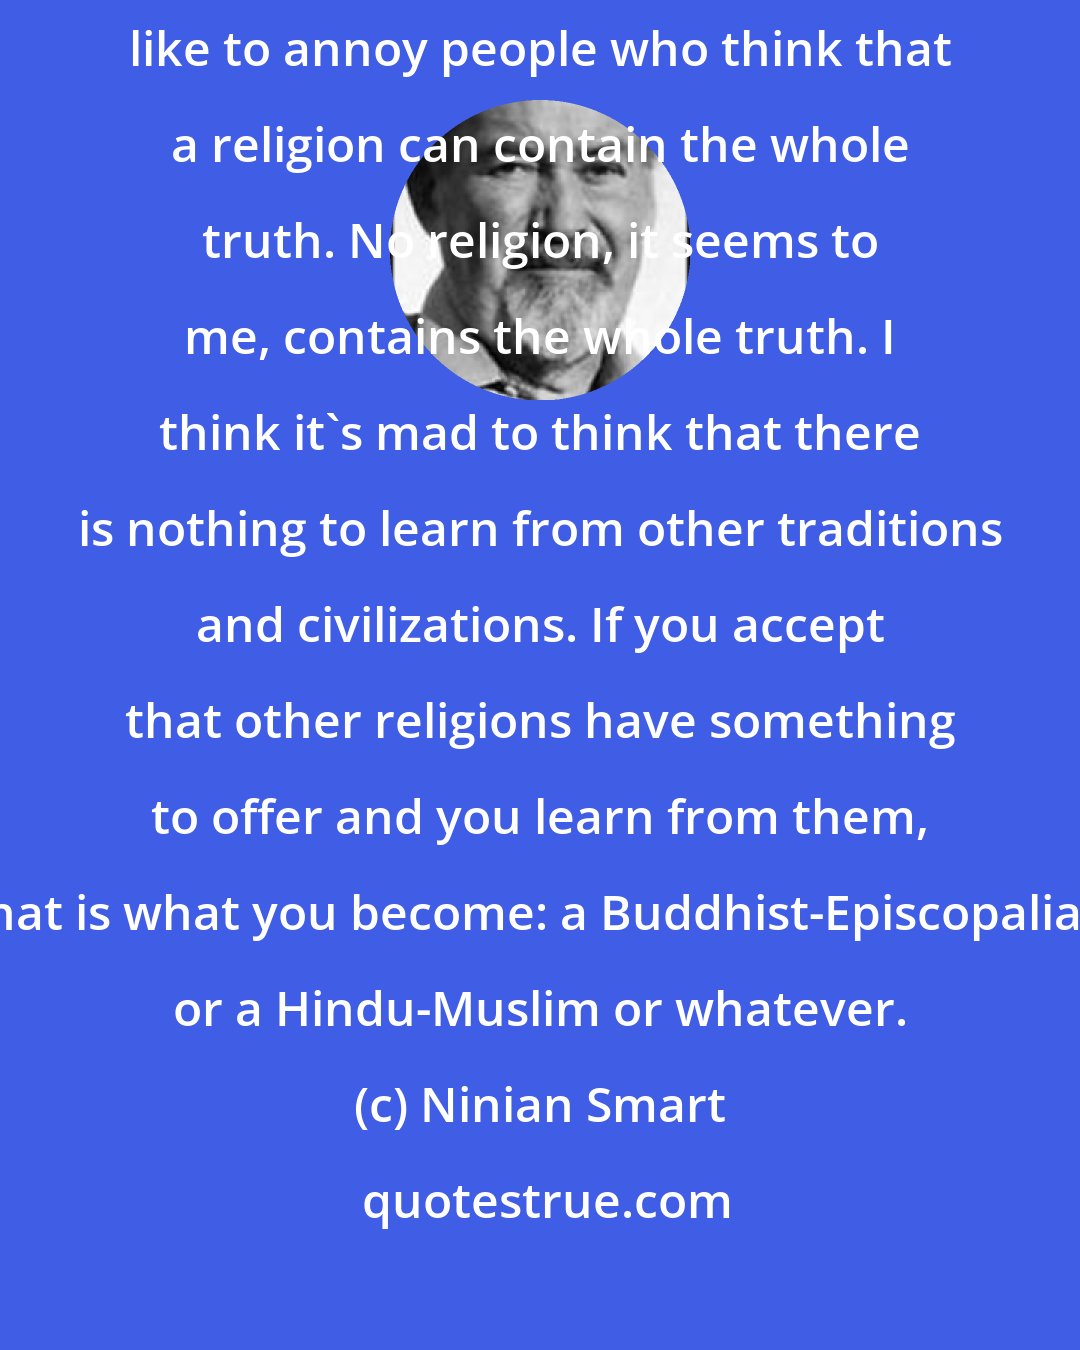 Ninian Smart: I often say that I'm a Buddhist-Episcopalian. I say that partly to annoy people.I like to annoy people who think that a religion can contain the whole truth. No religion, it seems to me, contains the whole truth. I think it's mad to think that there is nothing to learn from other traditions and civilizations. If you accept that other religions have something to offer and you learn from them, that is what you become: a Buddhist-Episcopalian or a Hindu-Muslim or whatever.